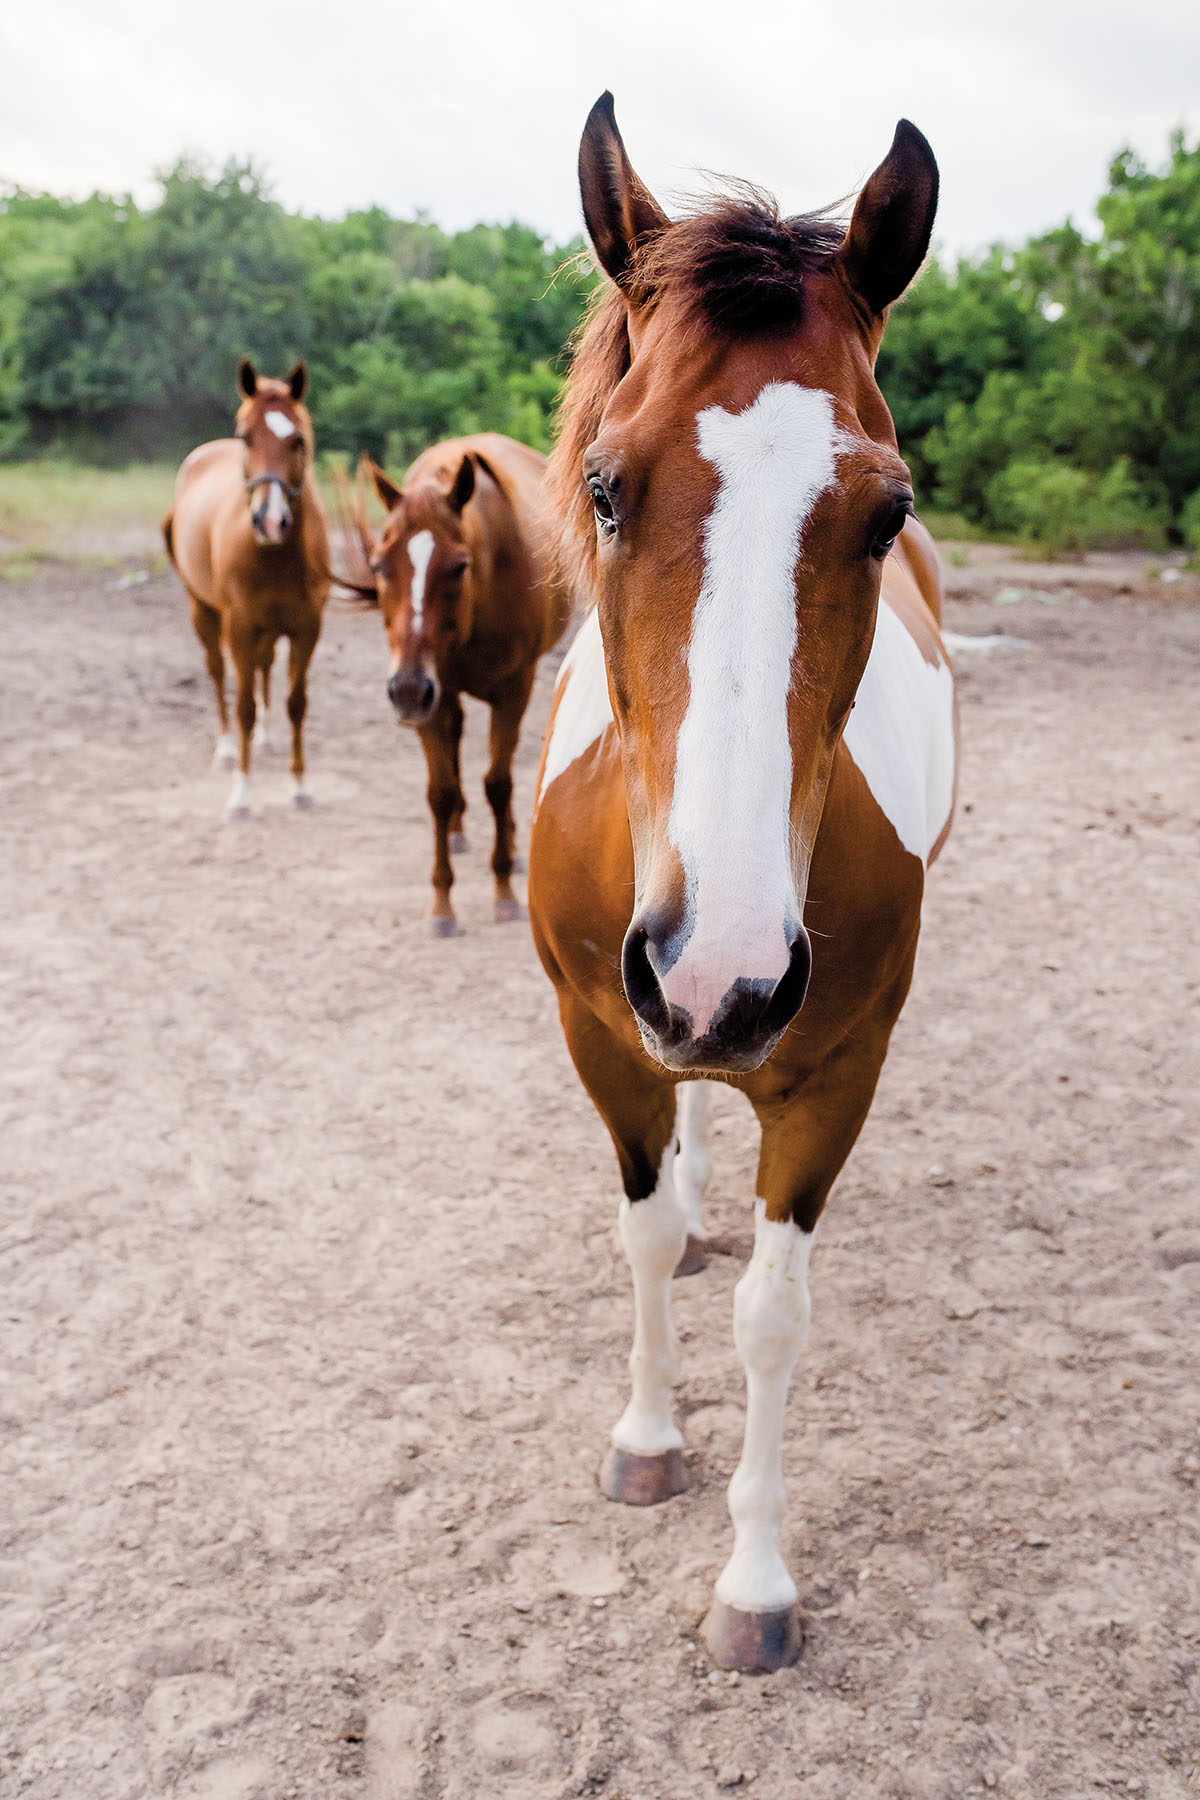 A group of brown and white horses walk on a dirt path